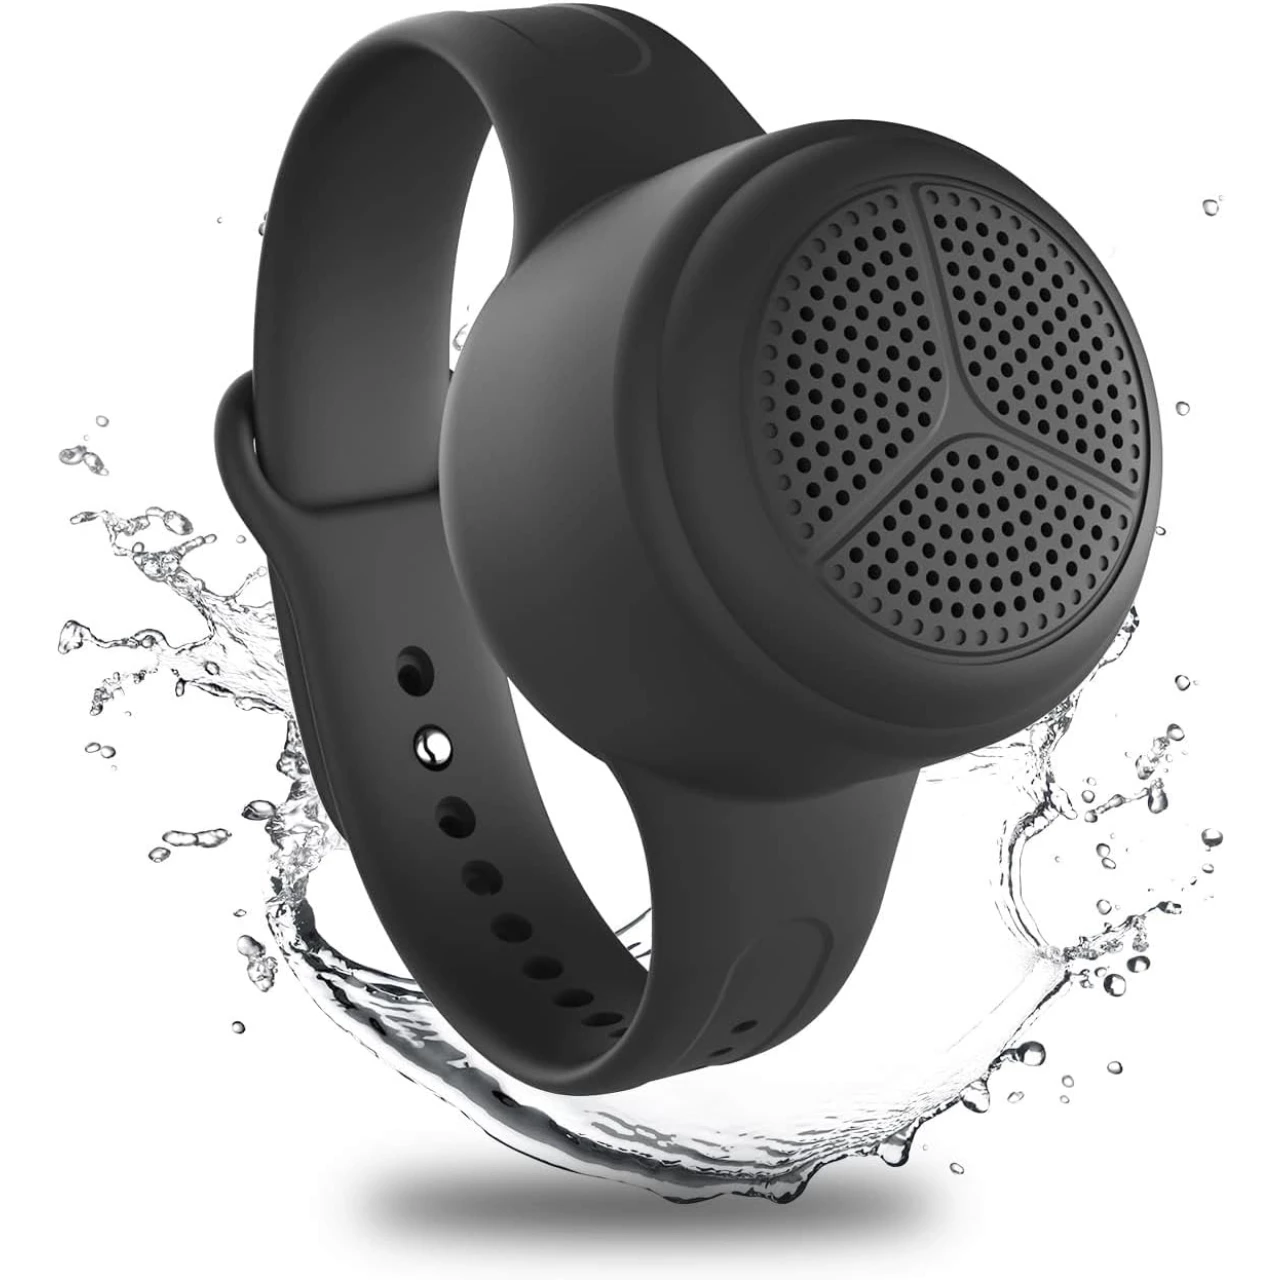 MOMOHO Portable Bluetooth Speaker with Wearable Band, IPX7 Waterproof Speaker TF Card Play Support Hiking, Riding, Running